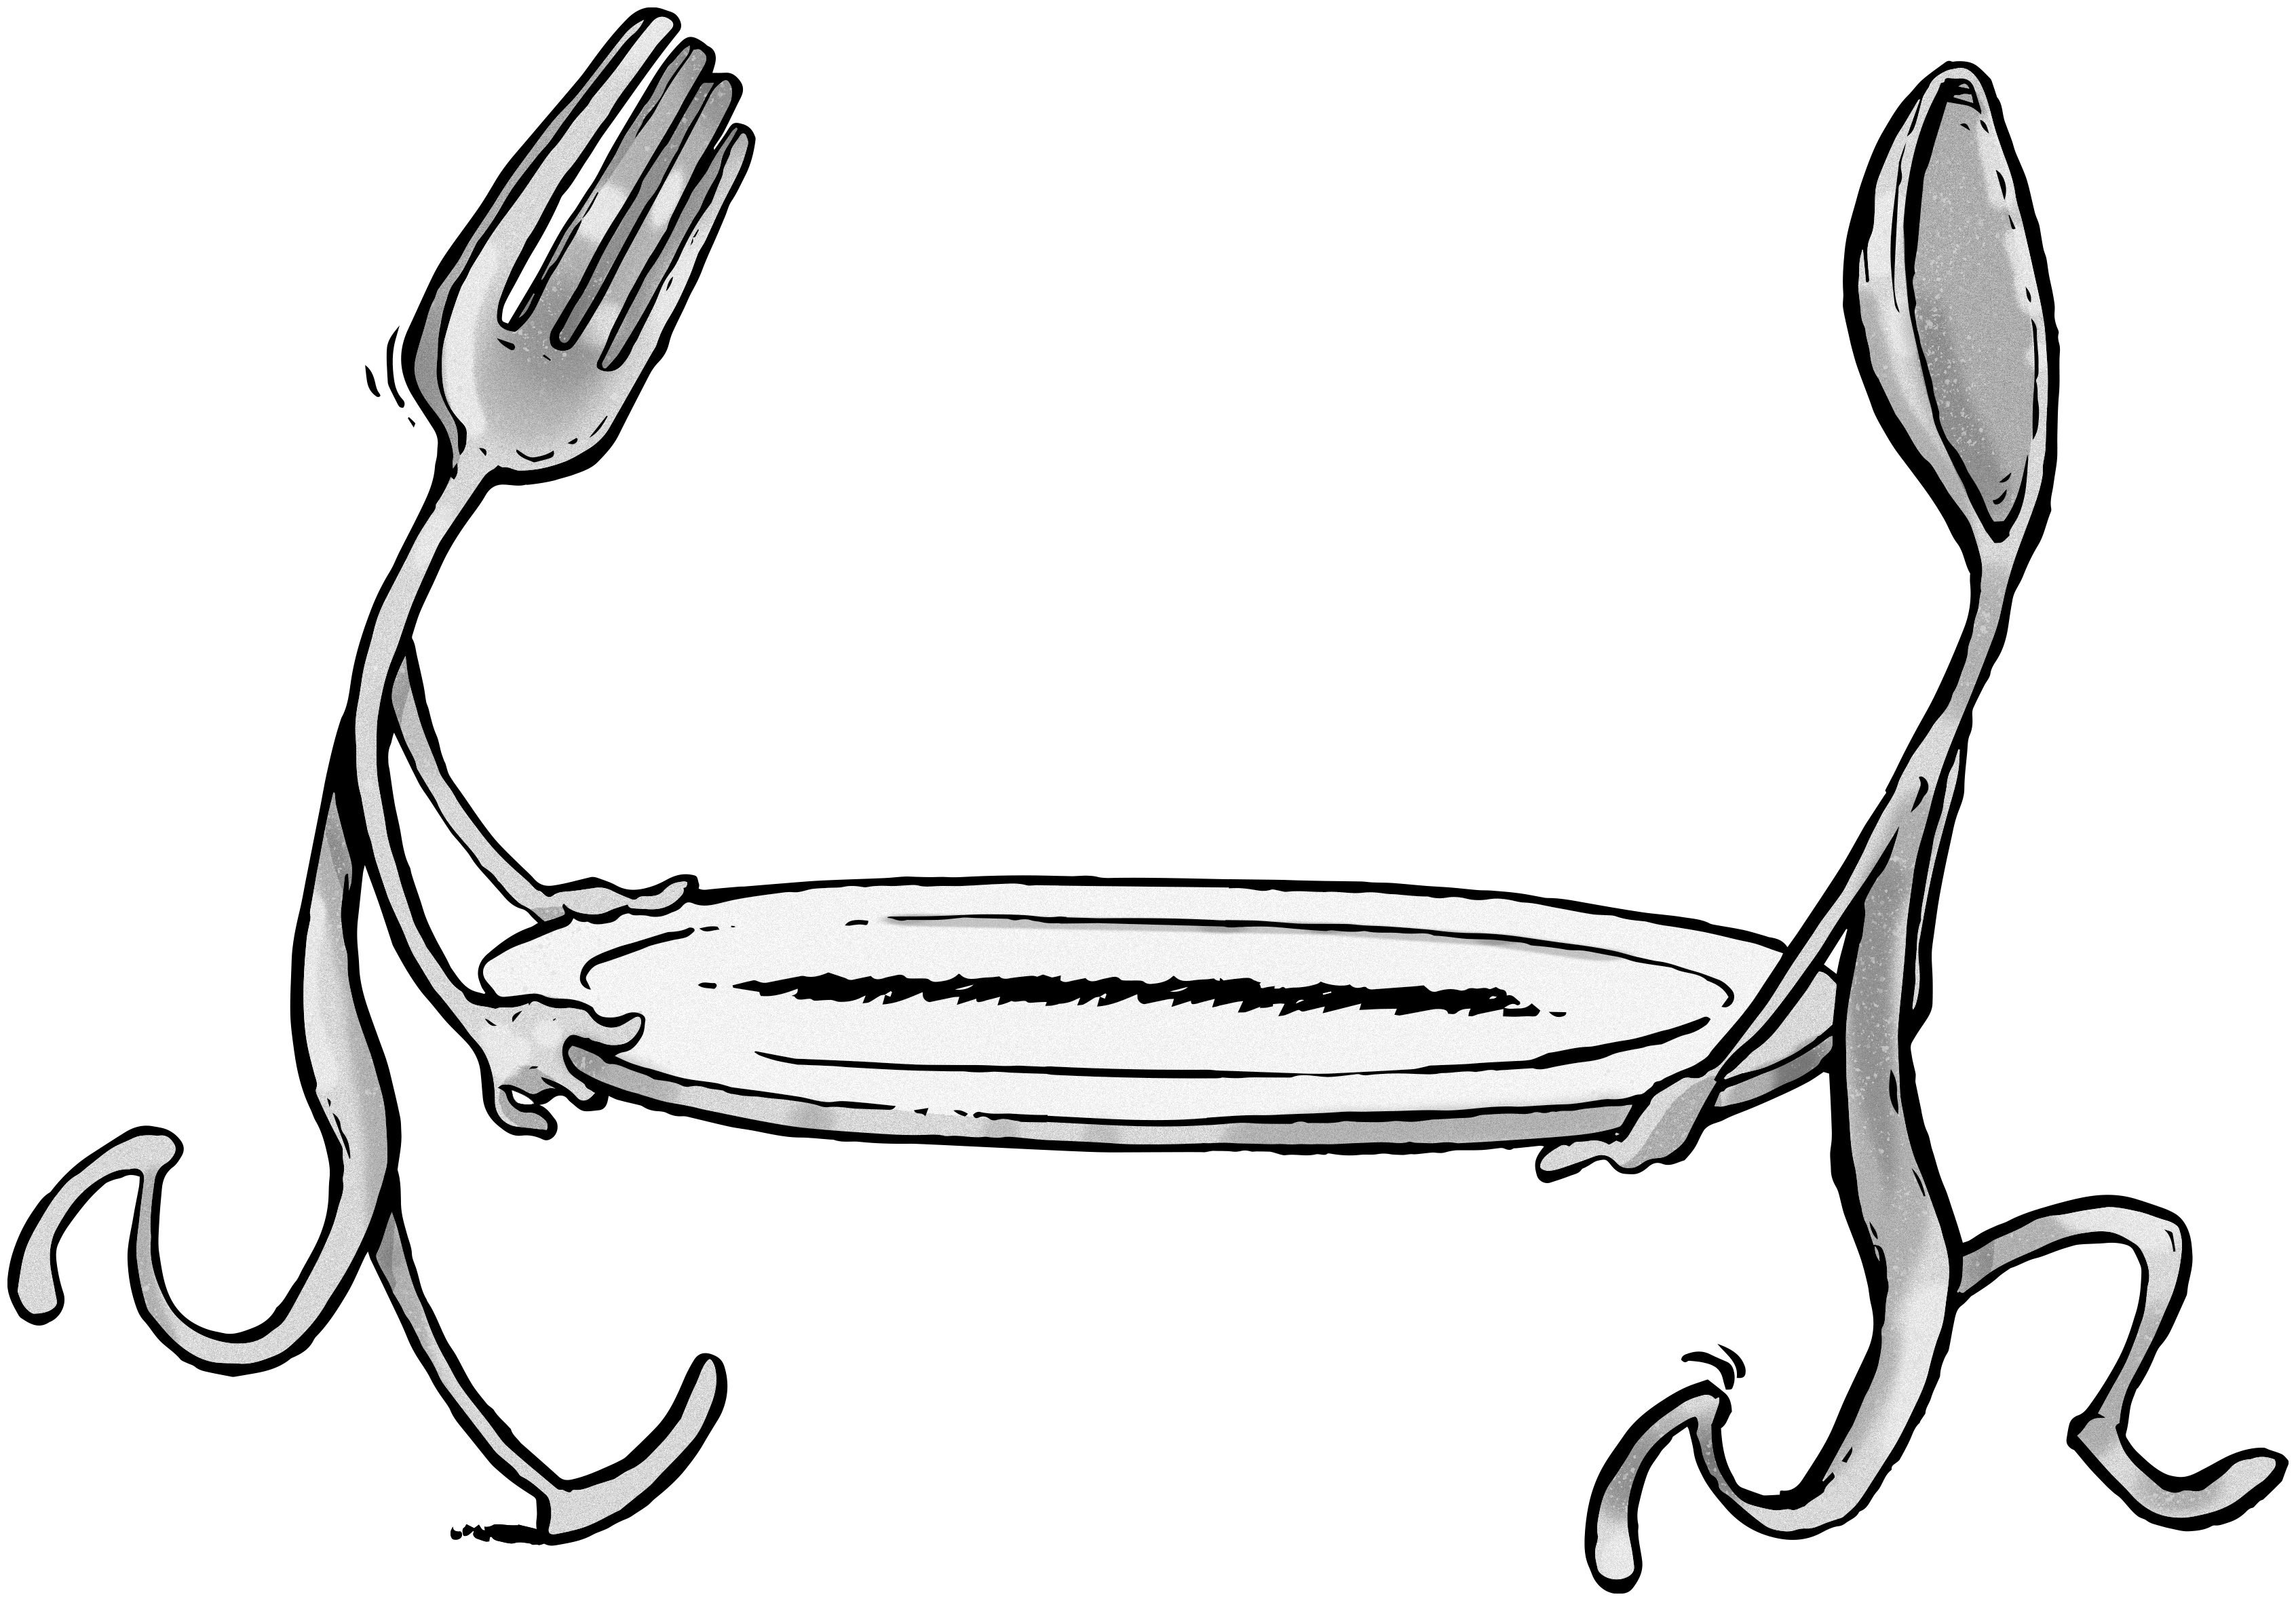 Fork and Spoon carrying a plate